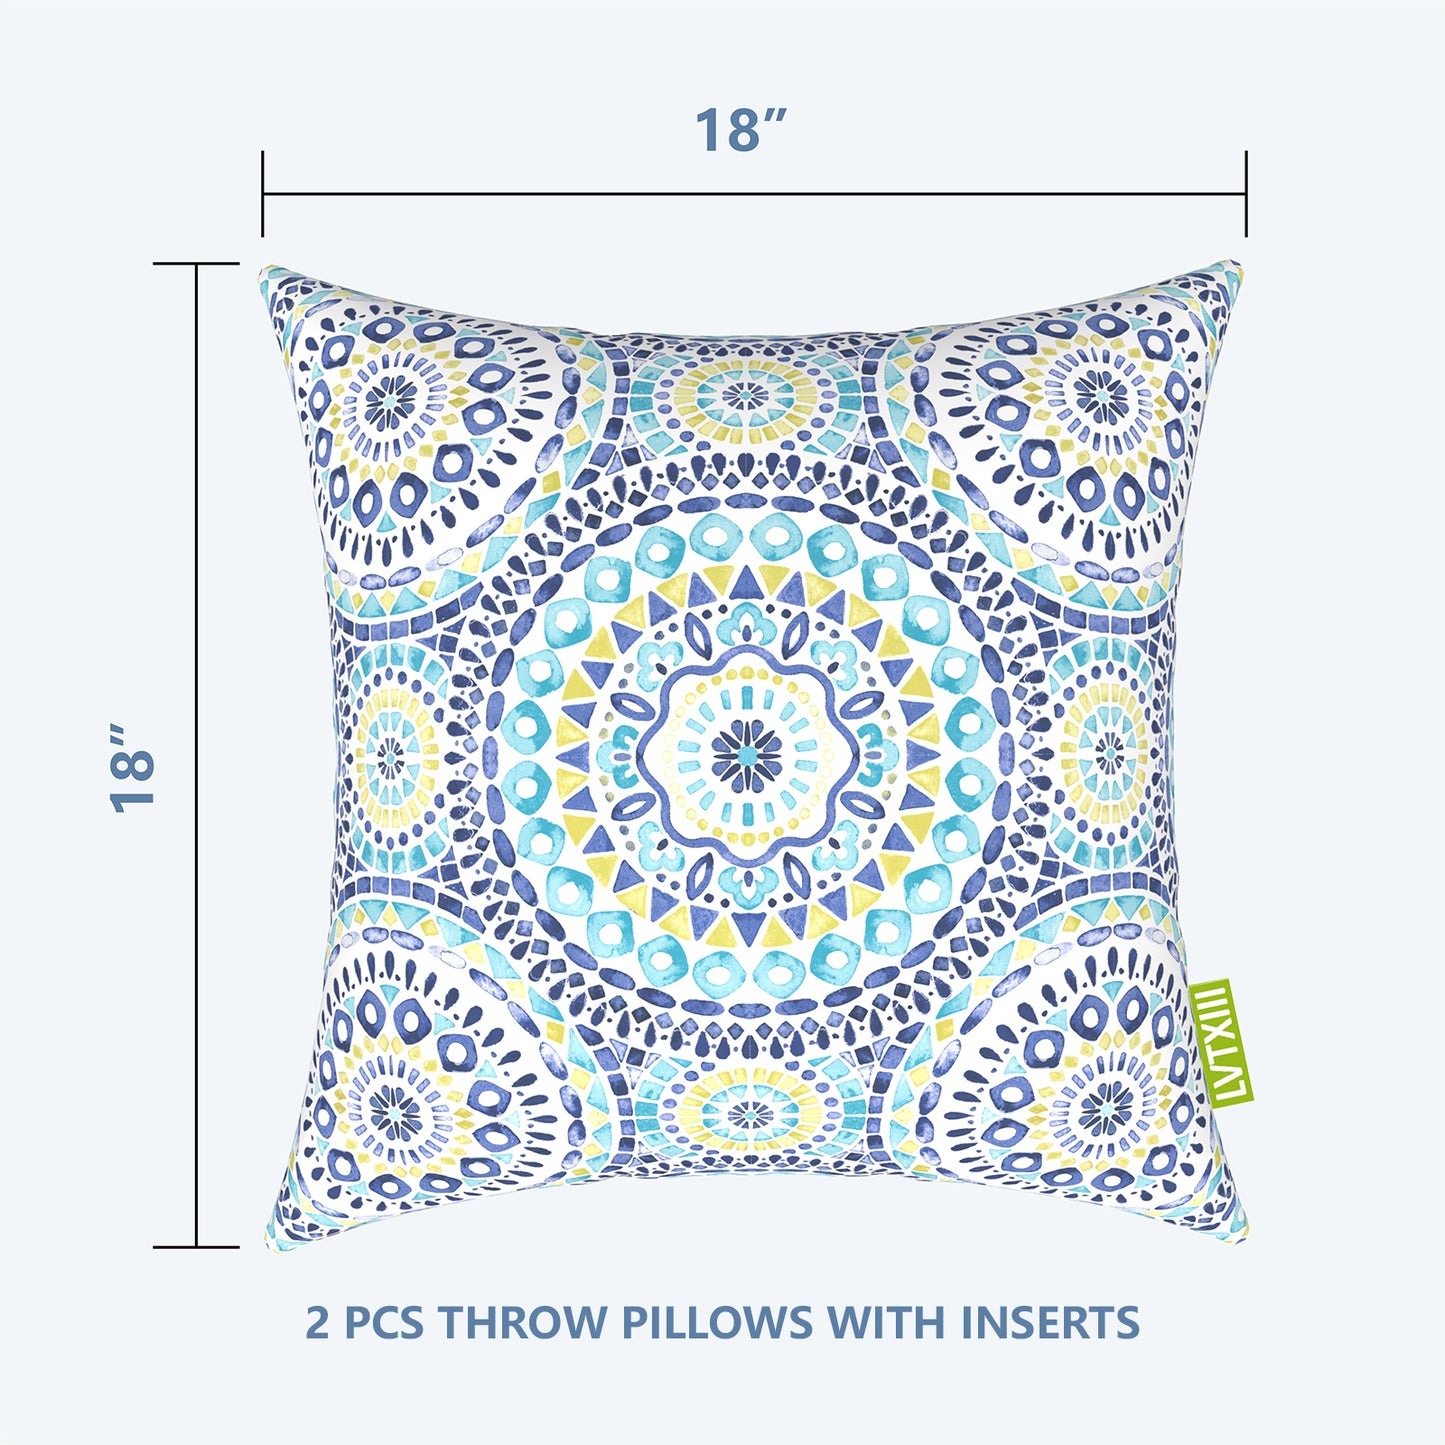 Melody Elephant Patio Throw Pillows with Inners, Fade Resistant Square Pillow Pack of 2, Decorative Garden Cushions for Home, 18x18 Inch, Delancey Lagoon